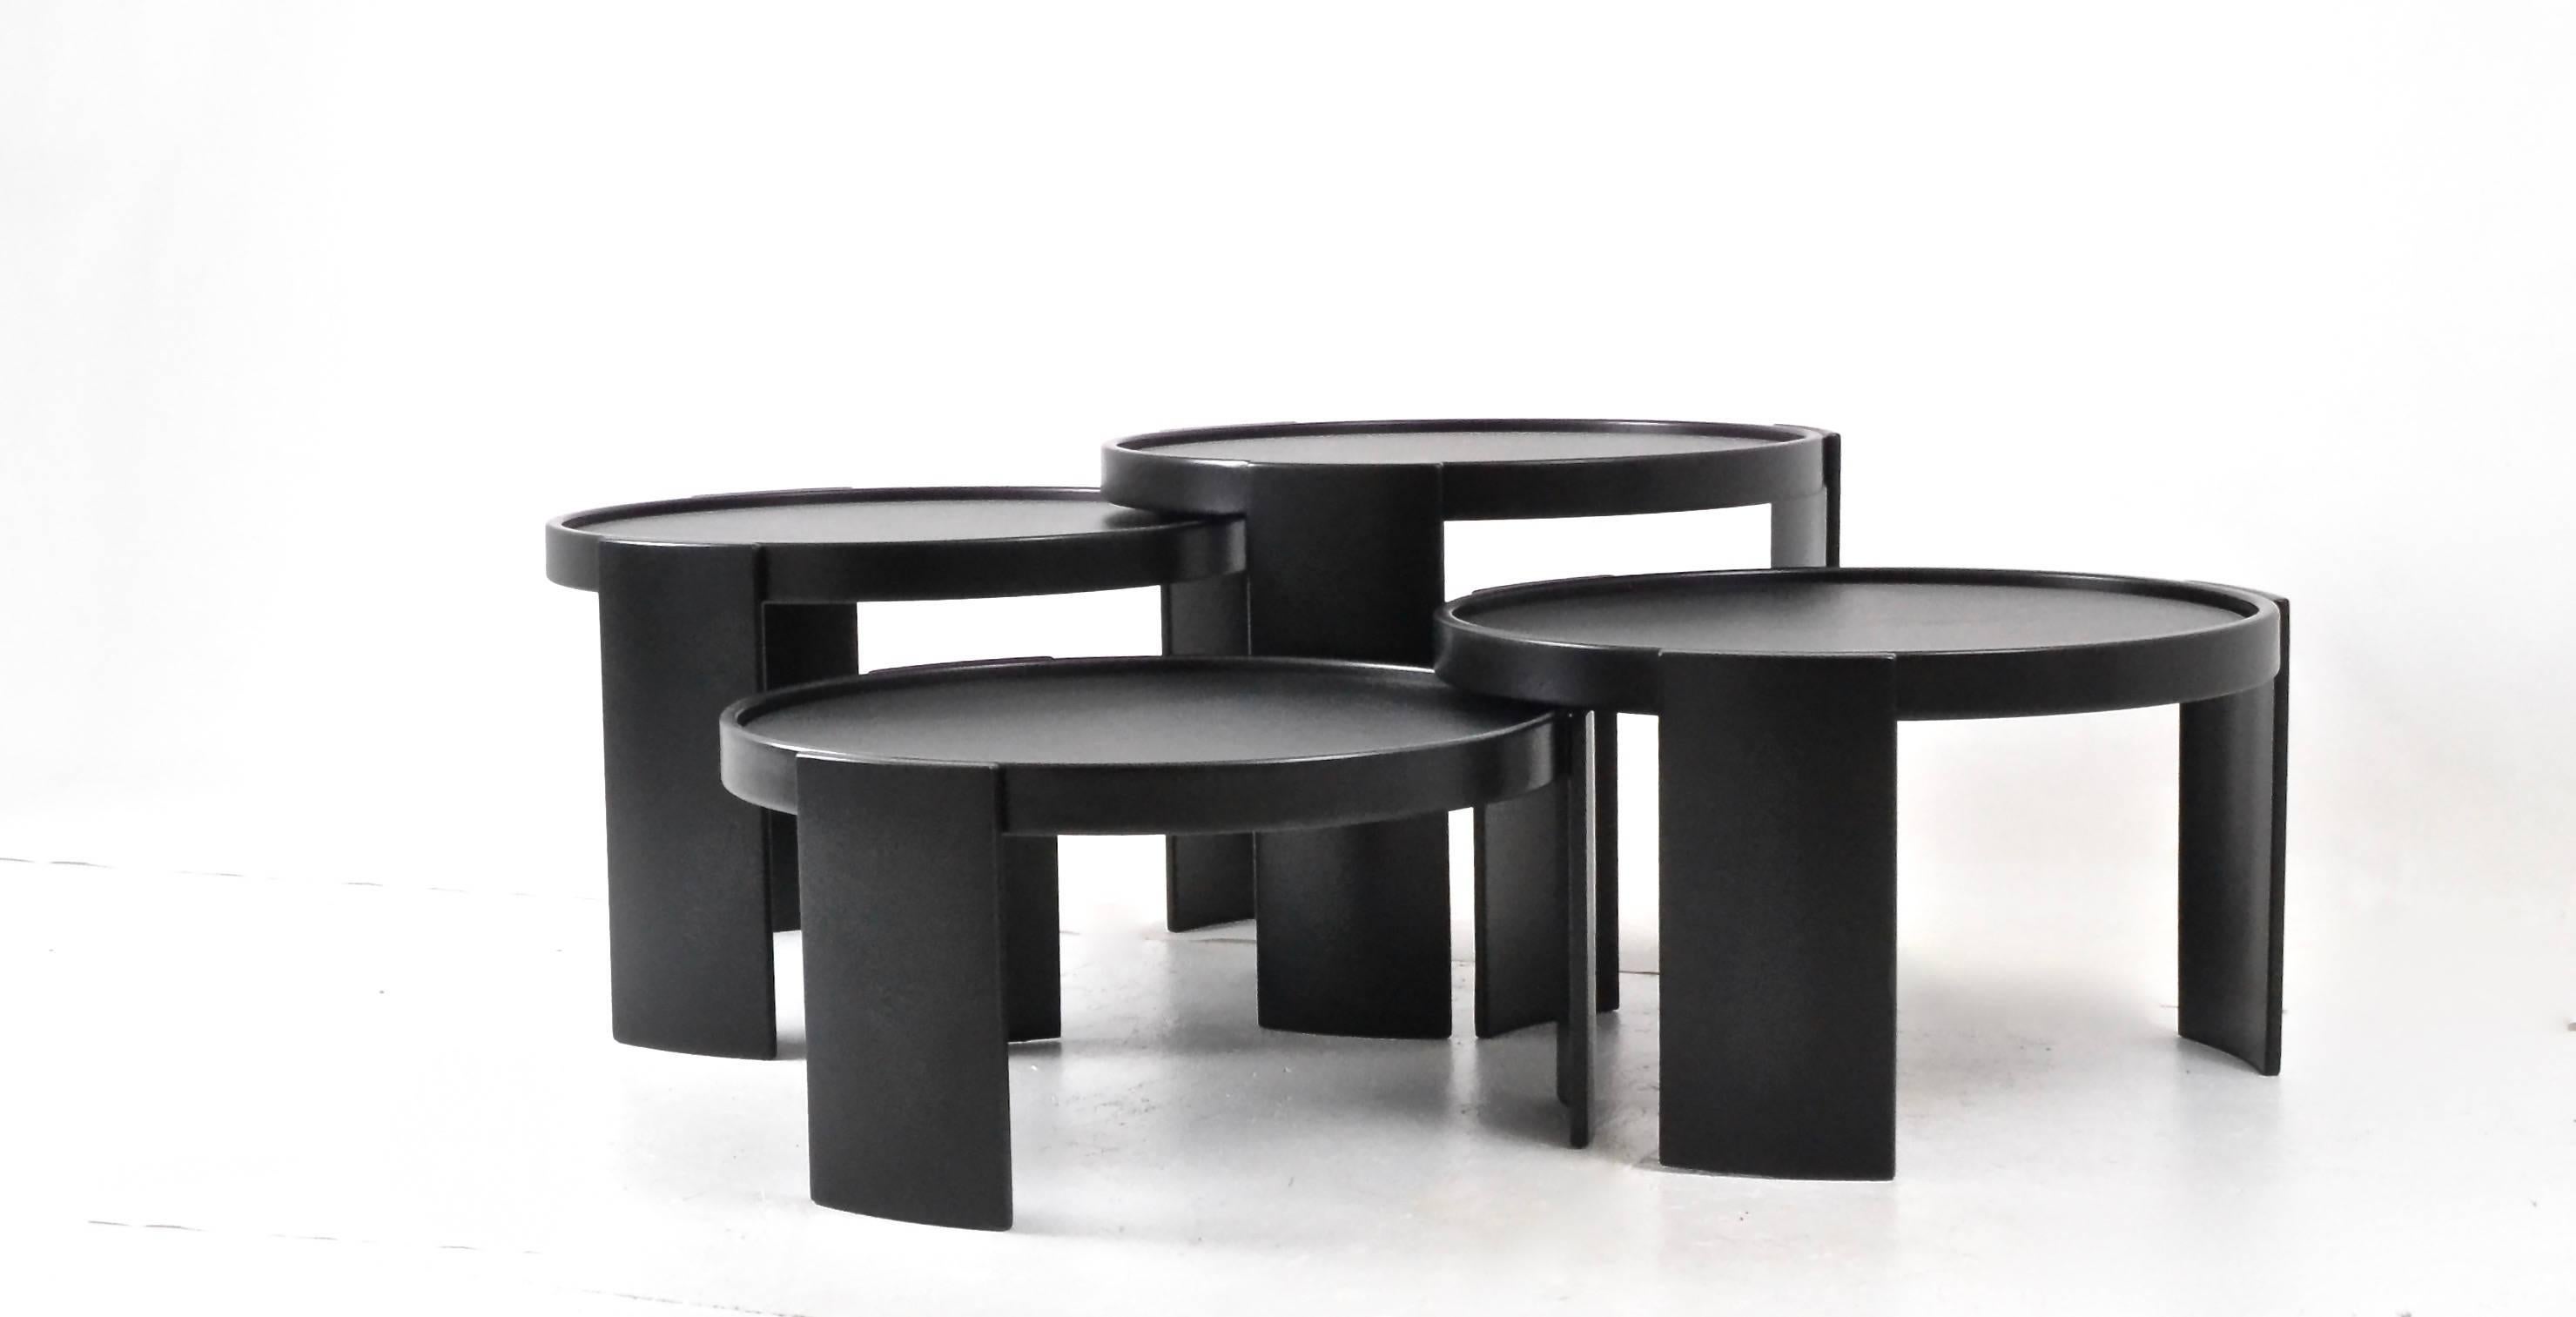 Beautifully restored early set of Cassina nesting tables --a Classic design that may be grouped together in various configurations both horizontally and vertically. There are four tales with interlocking curved legs. This set has the original tops